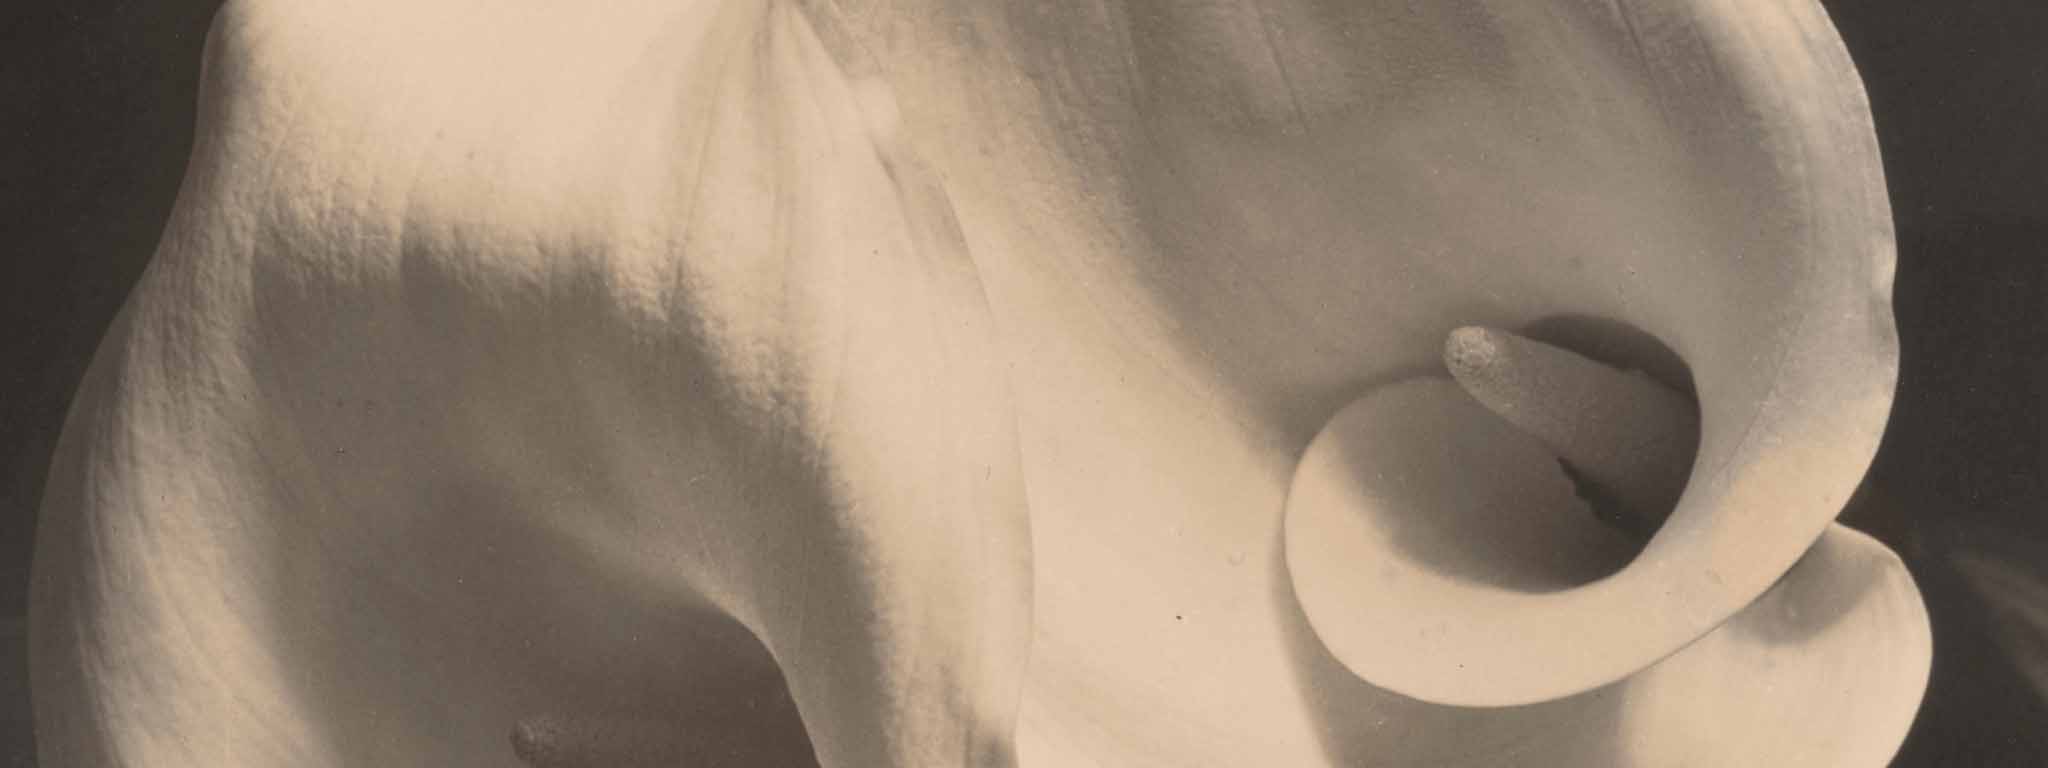 Two Callas (detail), 1925-1929, Imogen Cunningham. Gelatin silver print. The Art Institute of Chicago, Julien Levy Collection, Gift of Jean Levy and the Estate of Julien Levy, 1988.157.24. © The Imogen Cunningham Trust